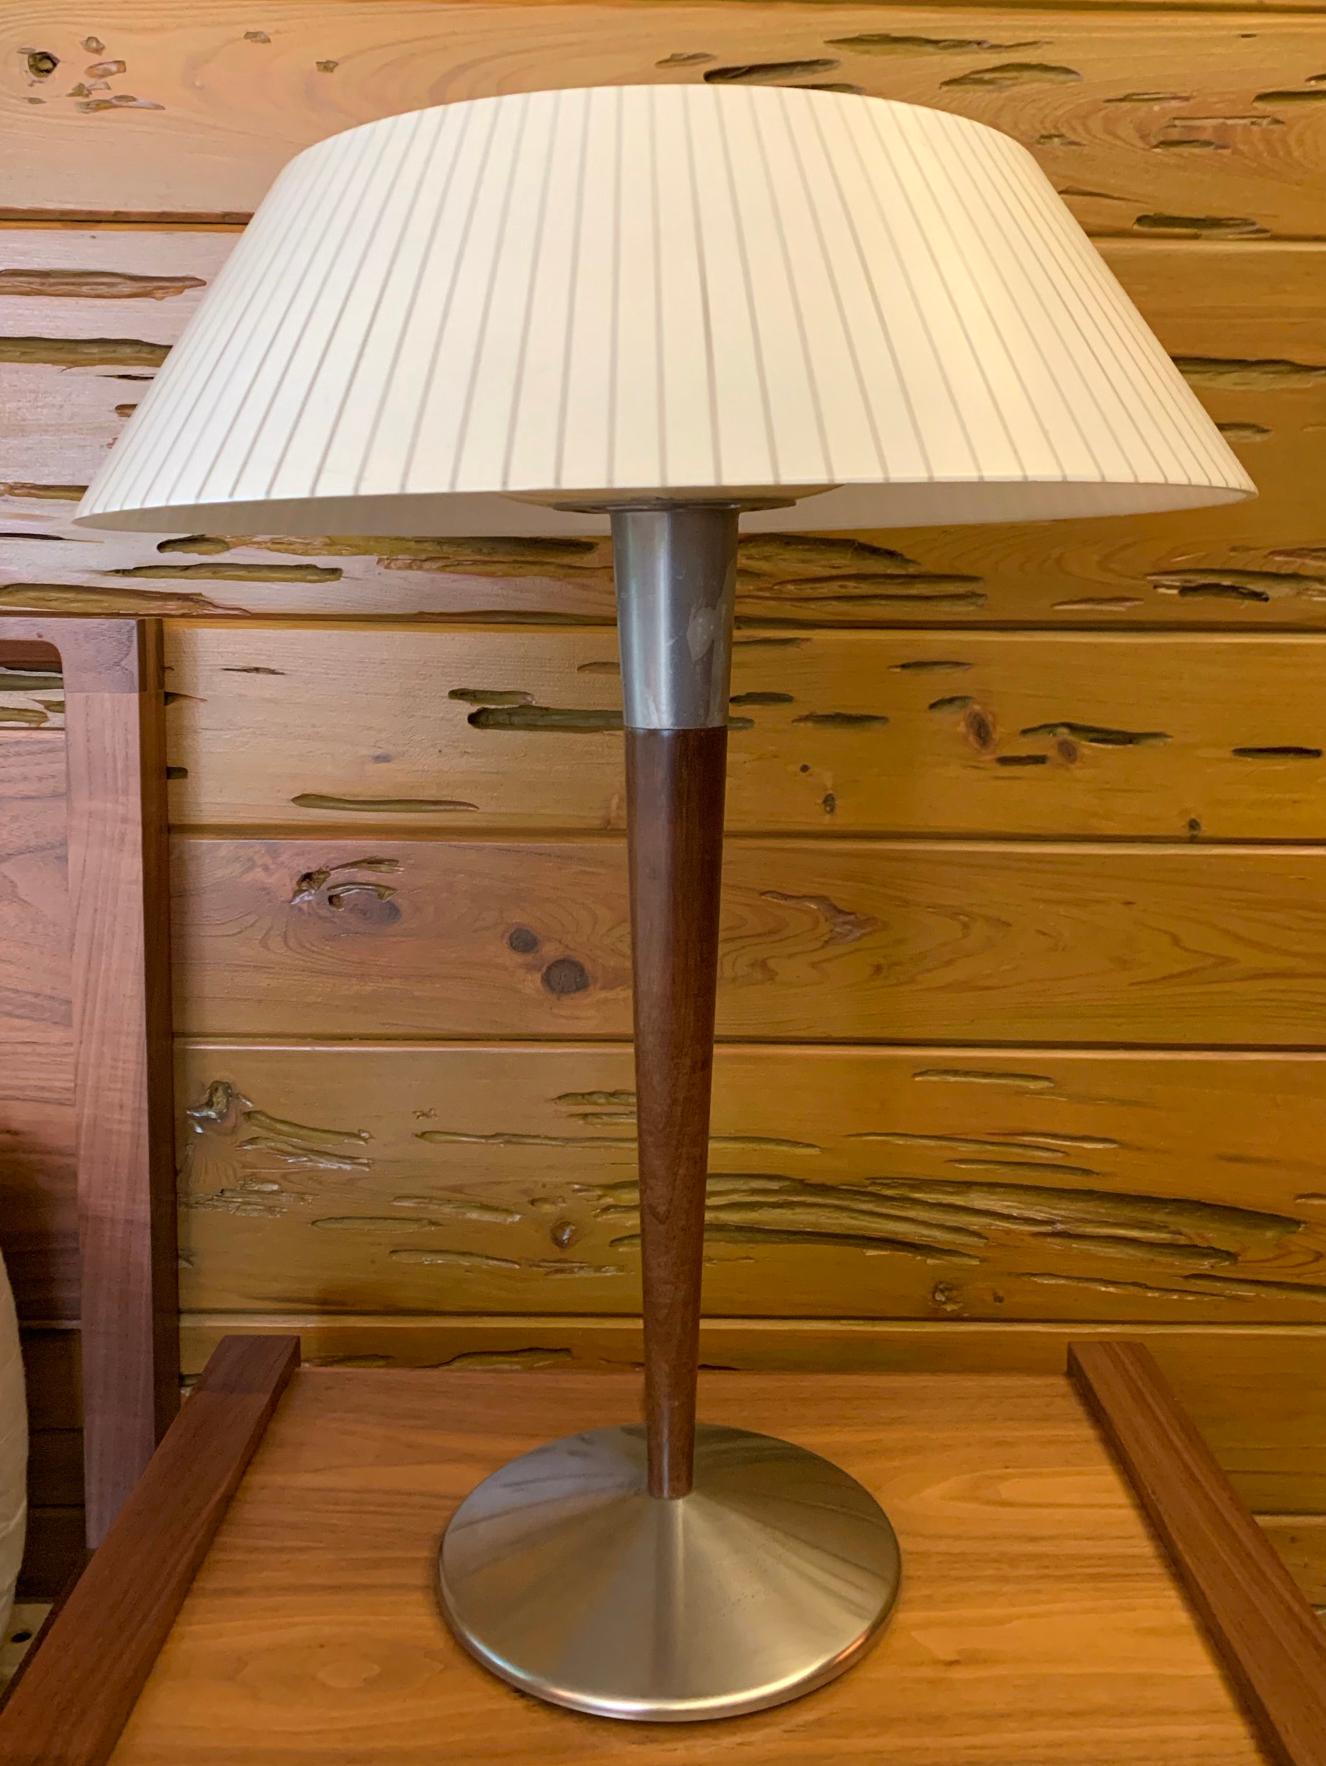 For your consideration is a gorgeous pair of Gerald Thurston for Laurel table lamps, with original shades, circa the 1970s. In excellent vintage condition. The dimensions are 19